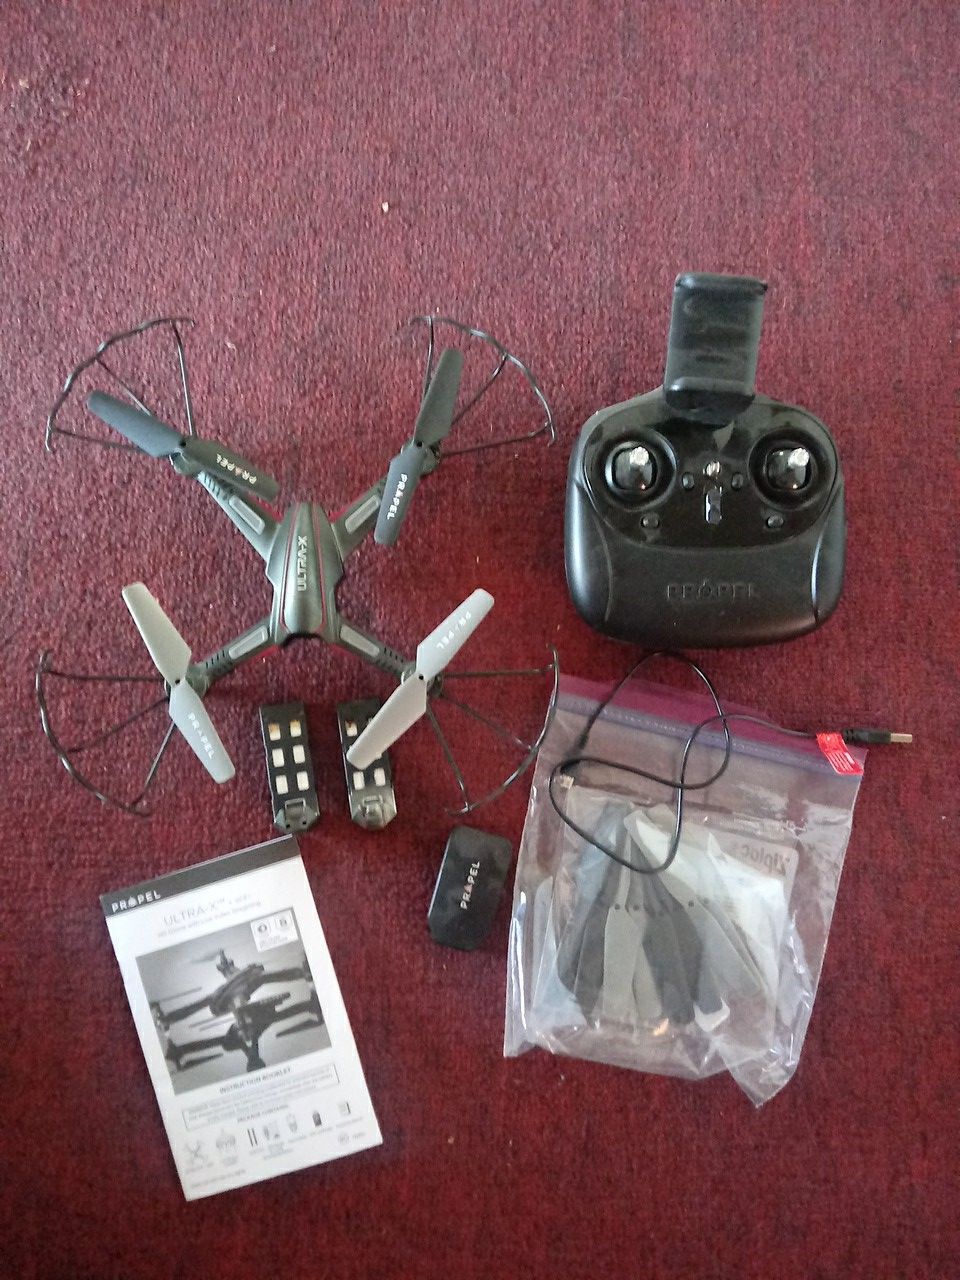 Ultra x drone propel good to go dont need it nomore